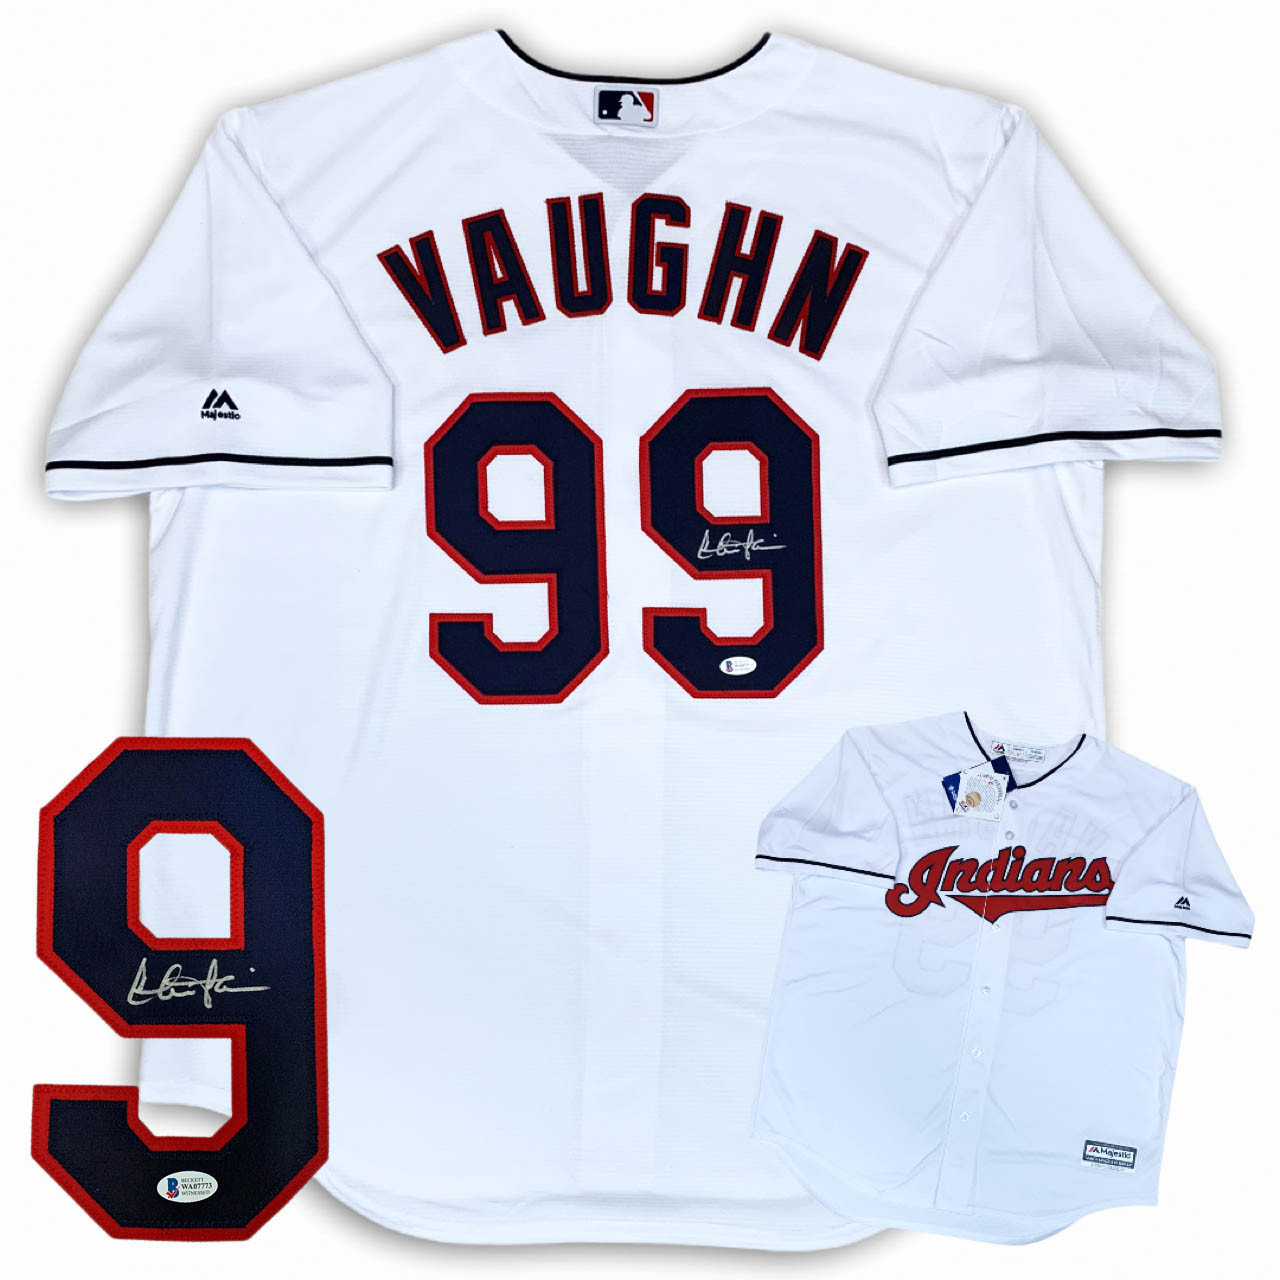 Charlie Sheen Autographed Signed Indians Majestic Jersey - Rick Vaughn -  Beckett Authentic